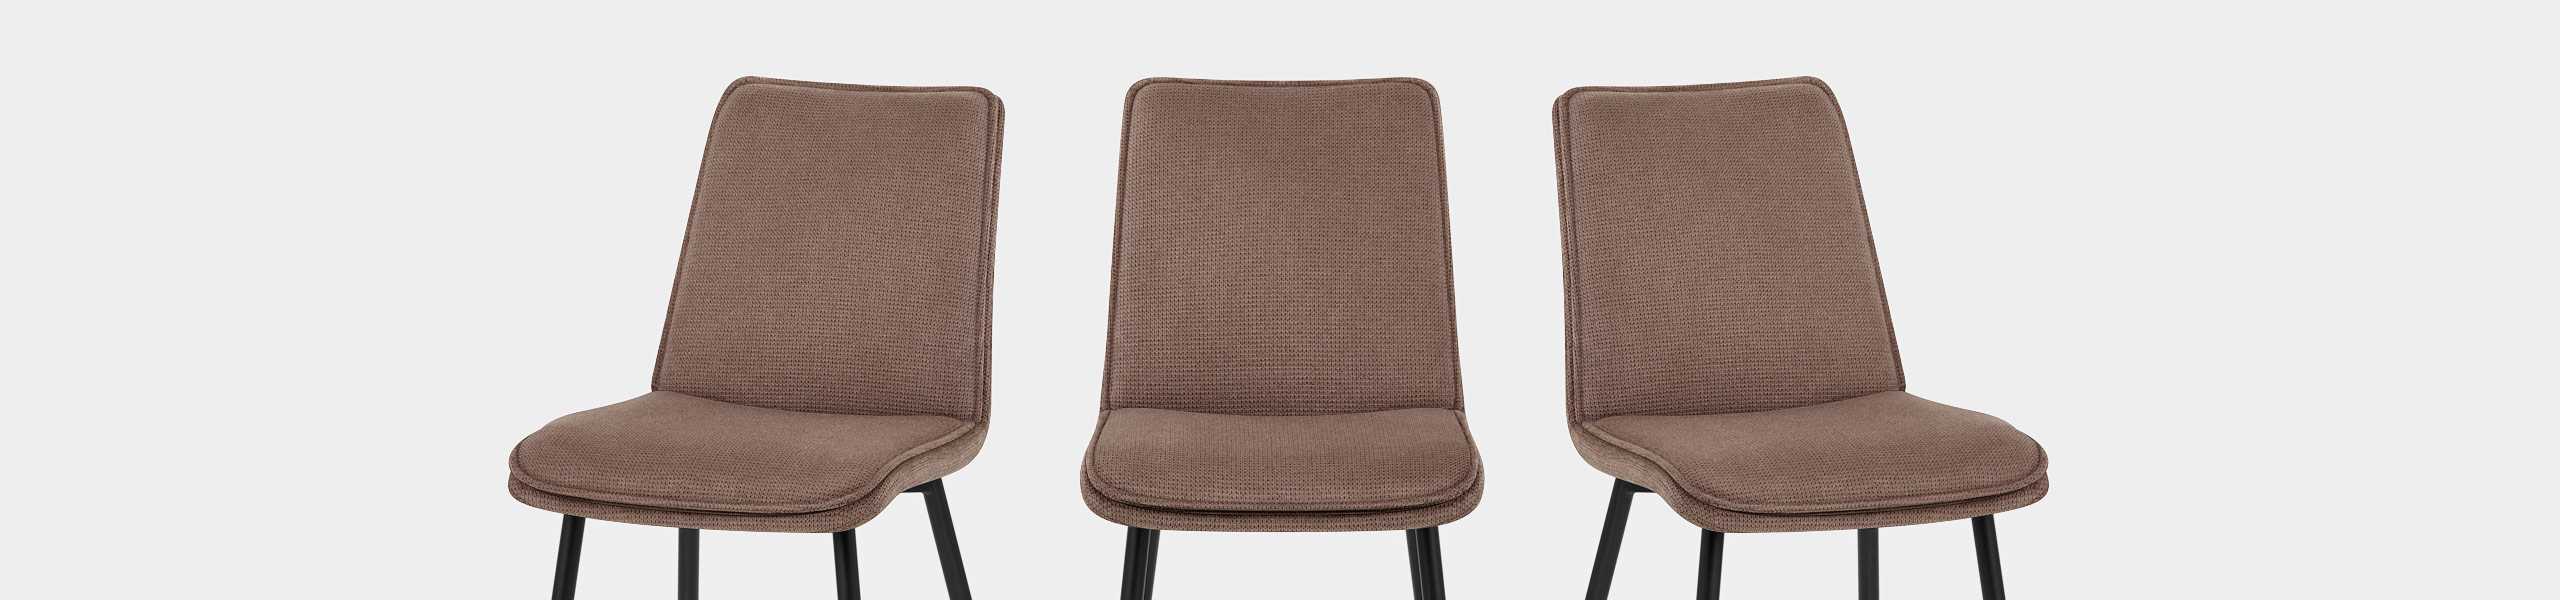 Abi Dining Chair Brown Fabric Video Banner